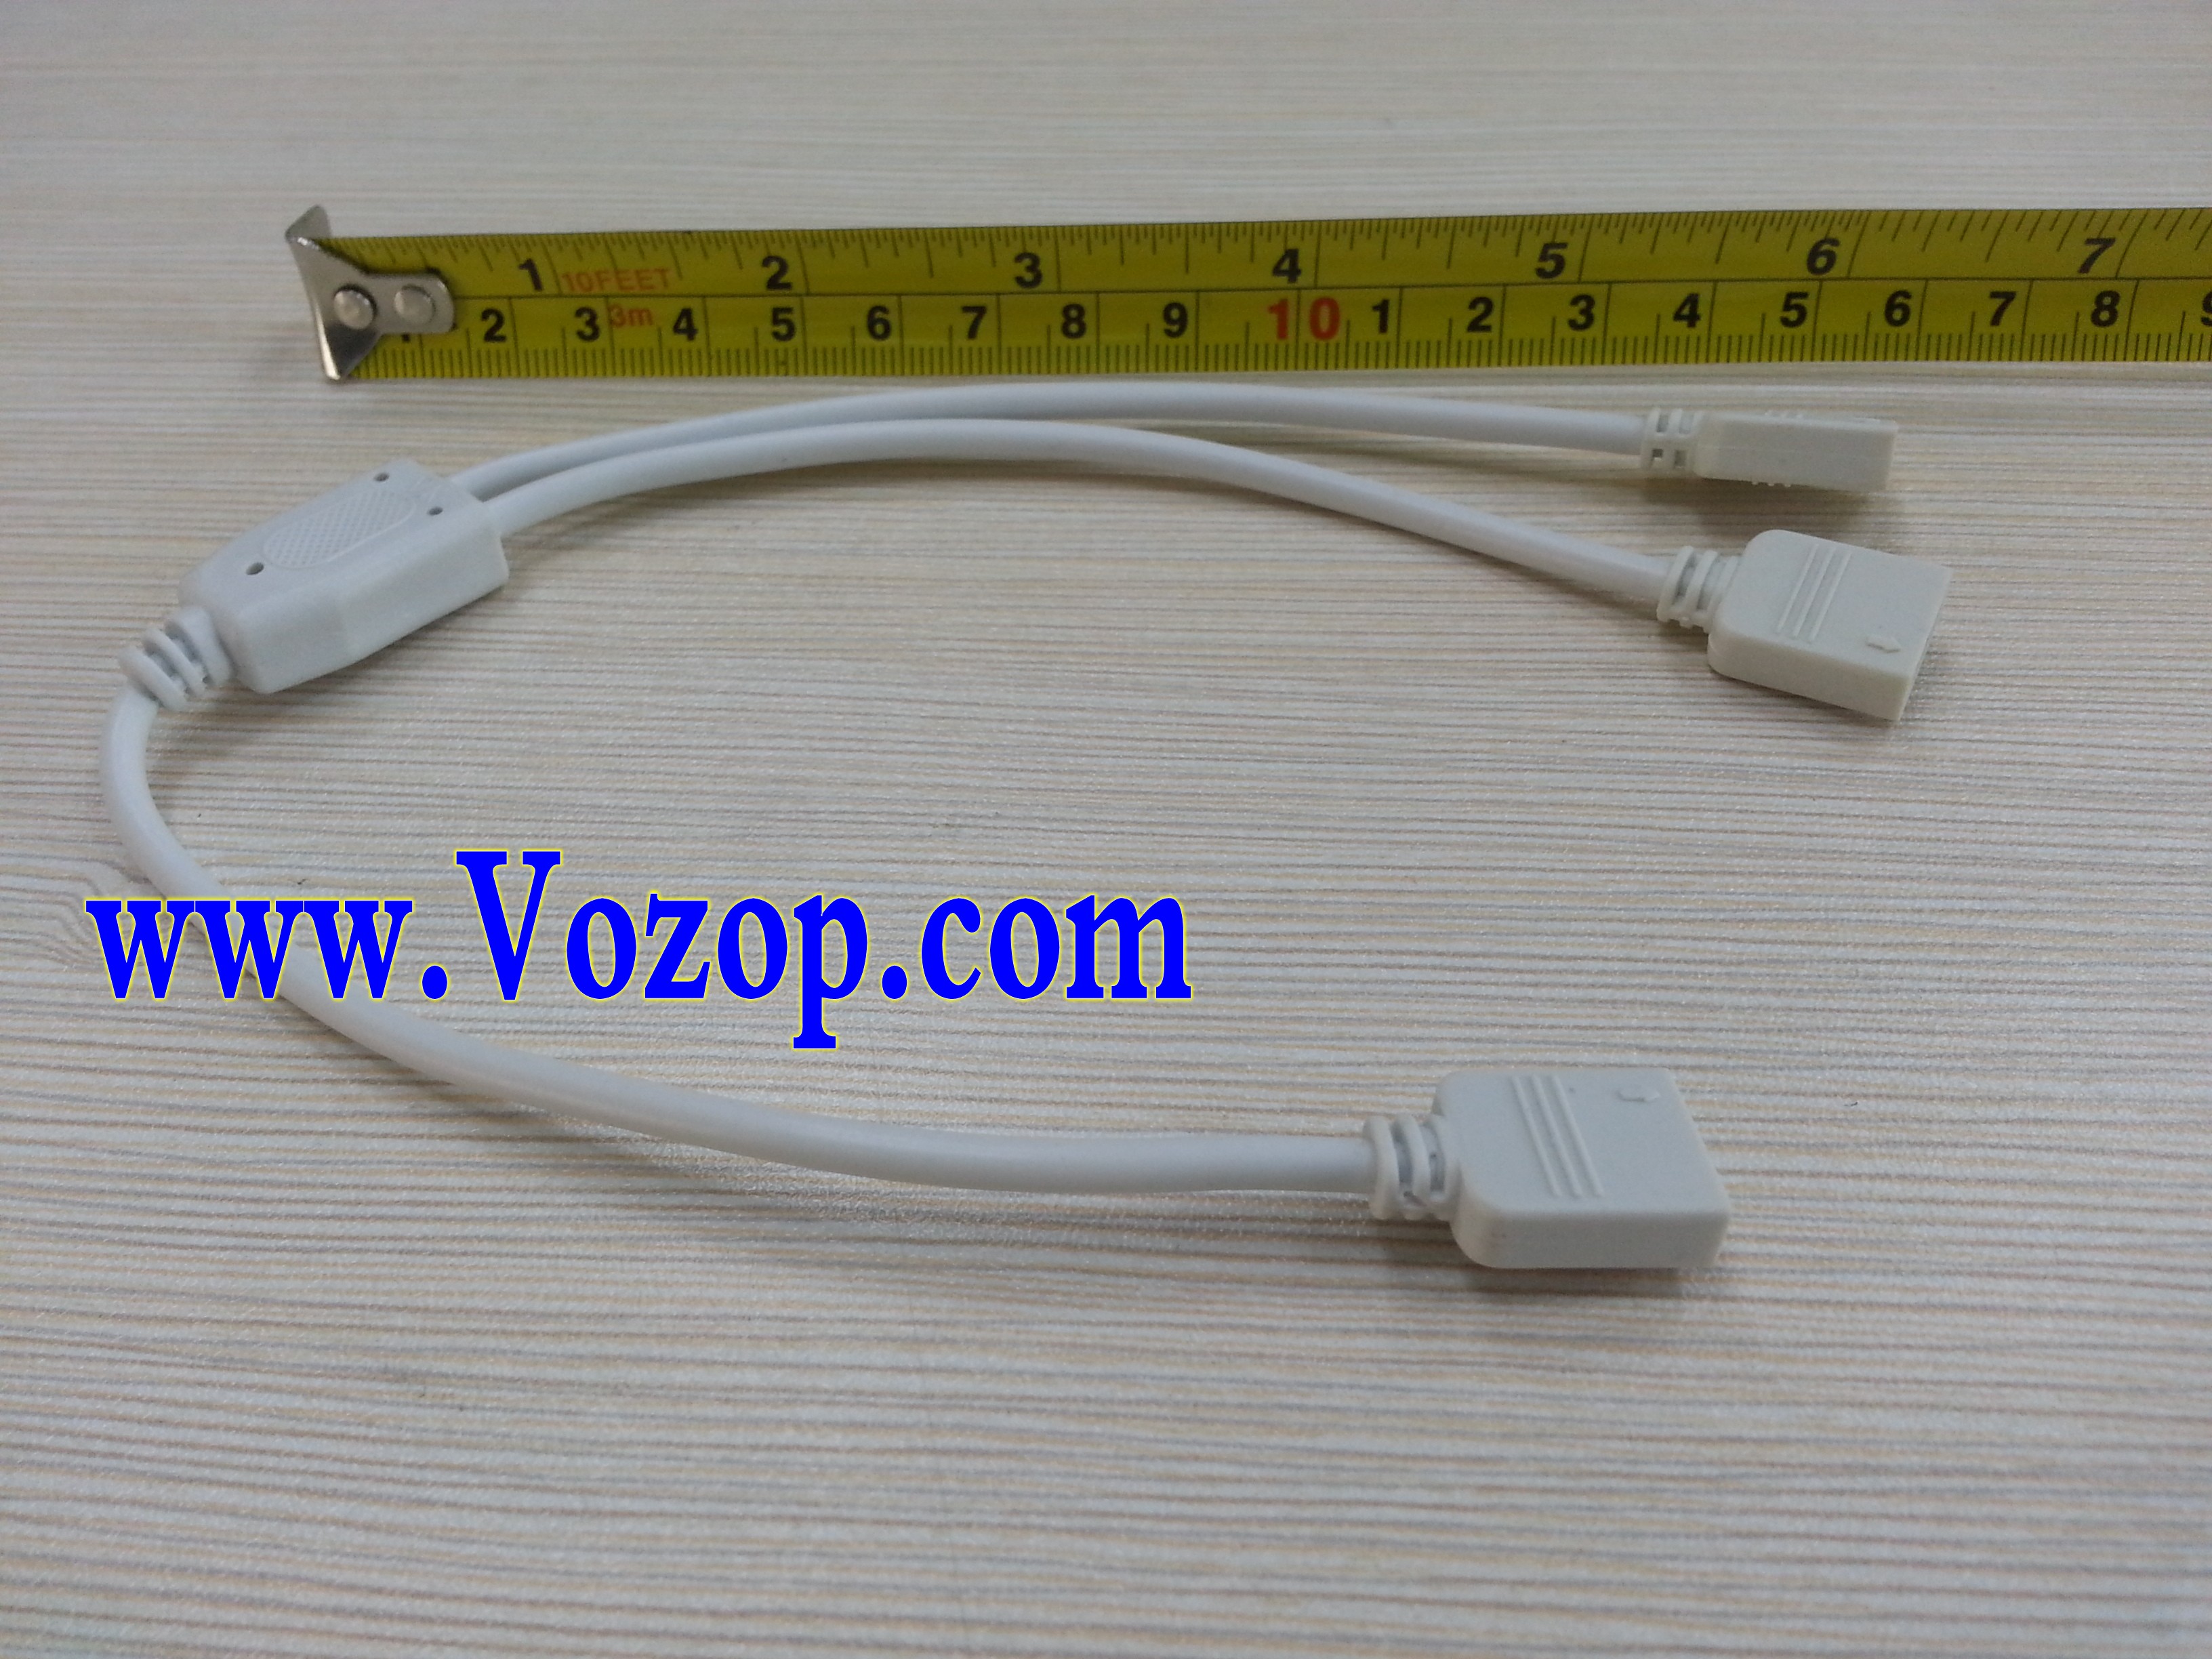 4_Pin_Splitter_1_to_2_Connector_Cable_for_RGB_LED_Strips_Light